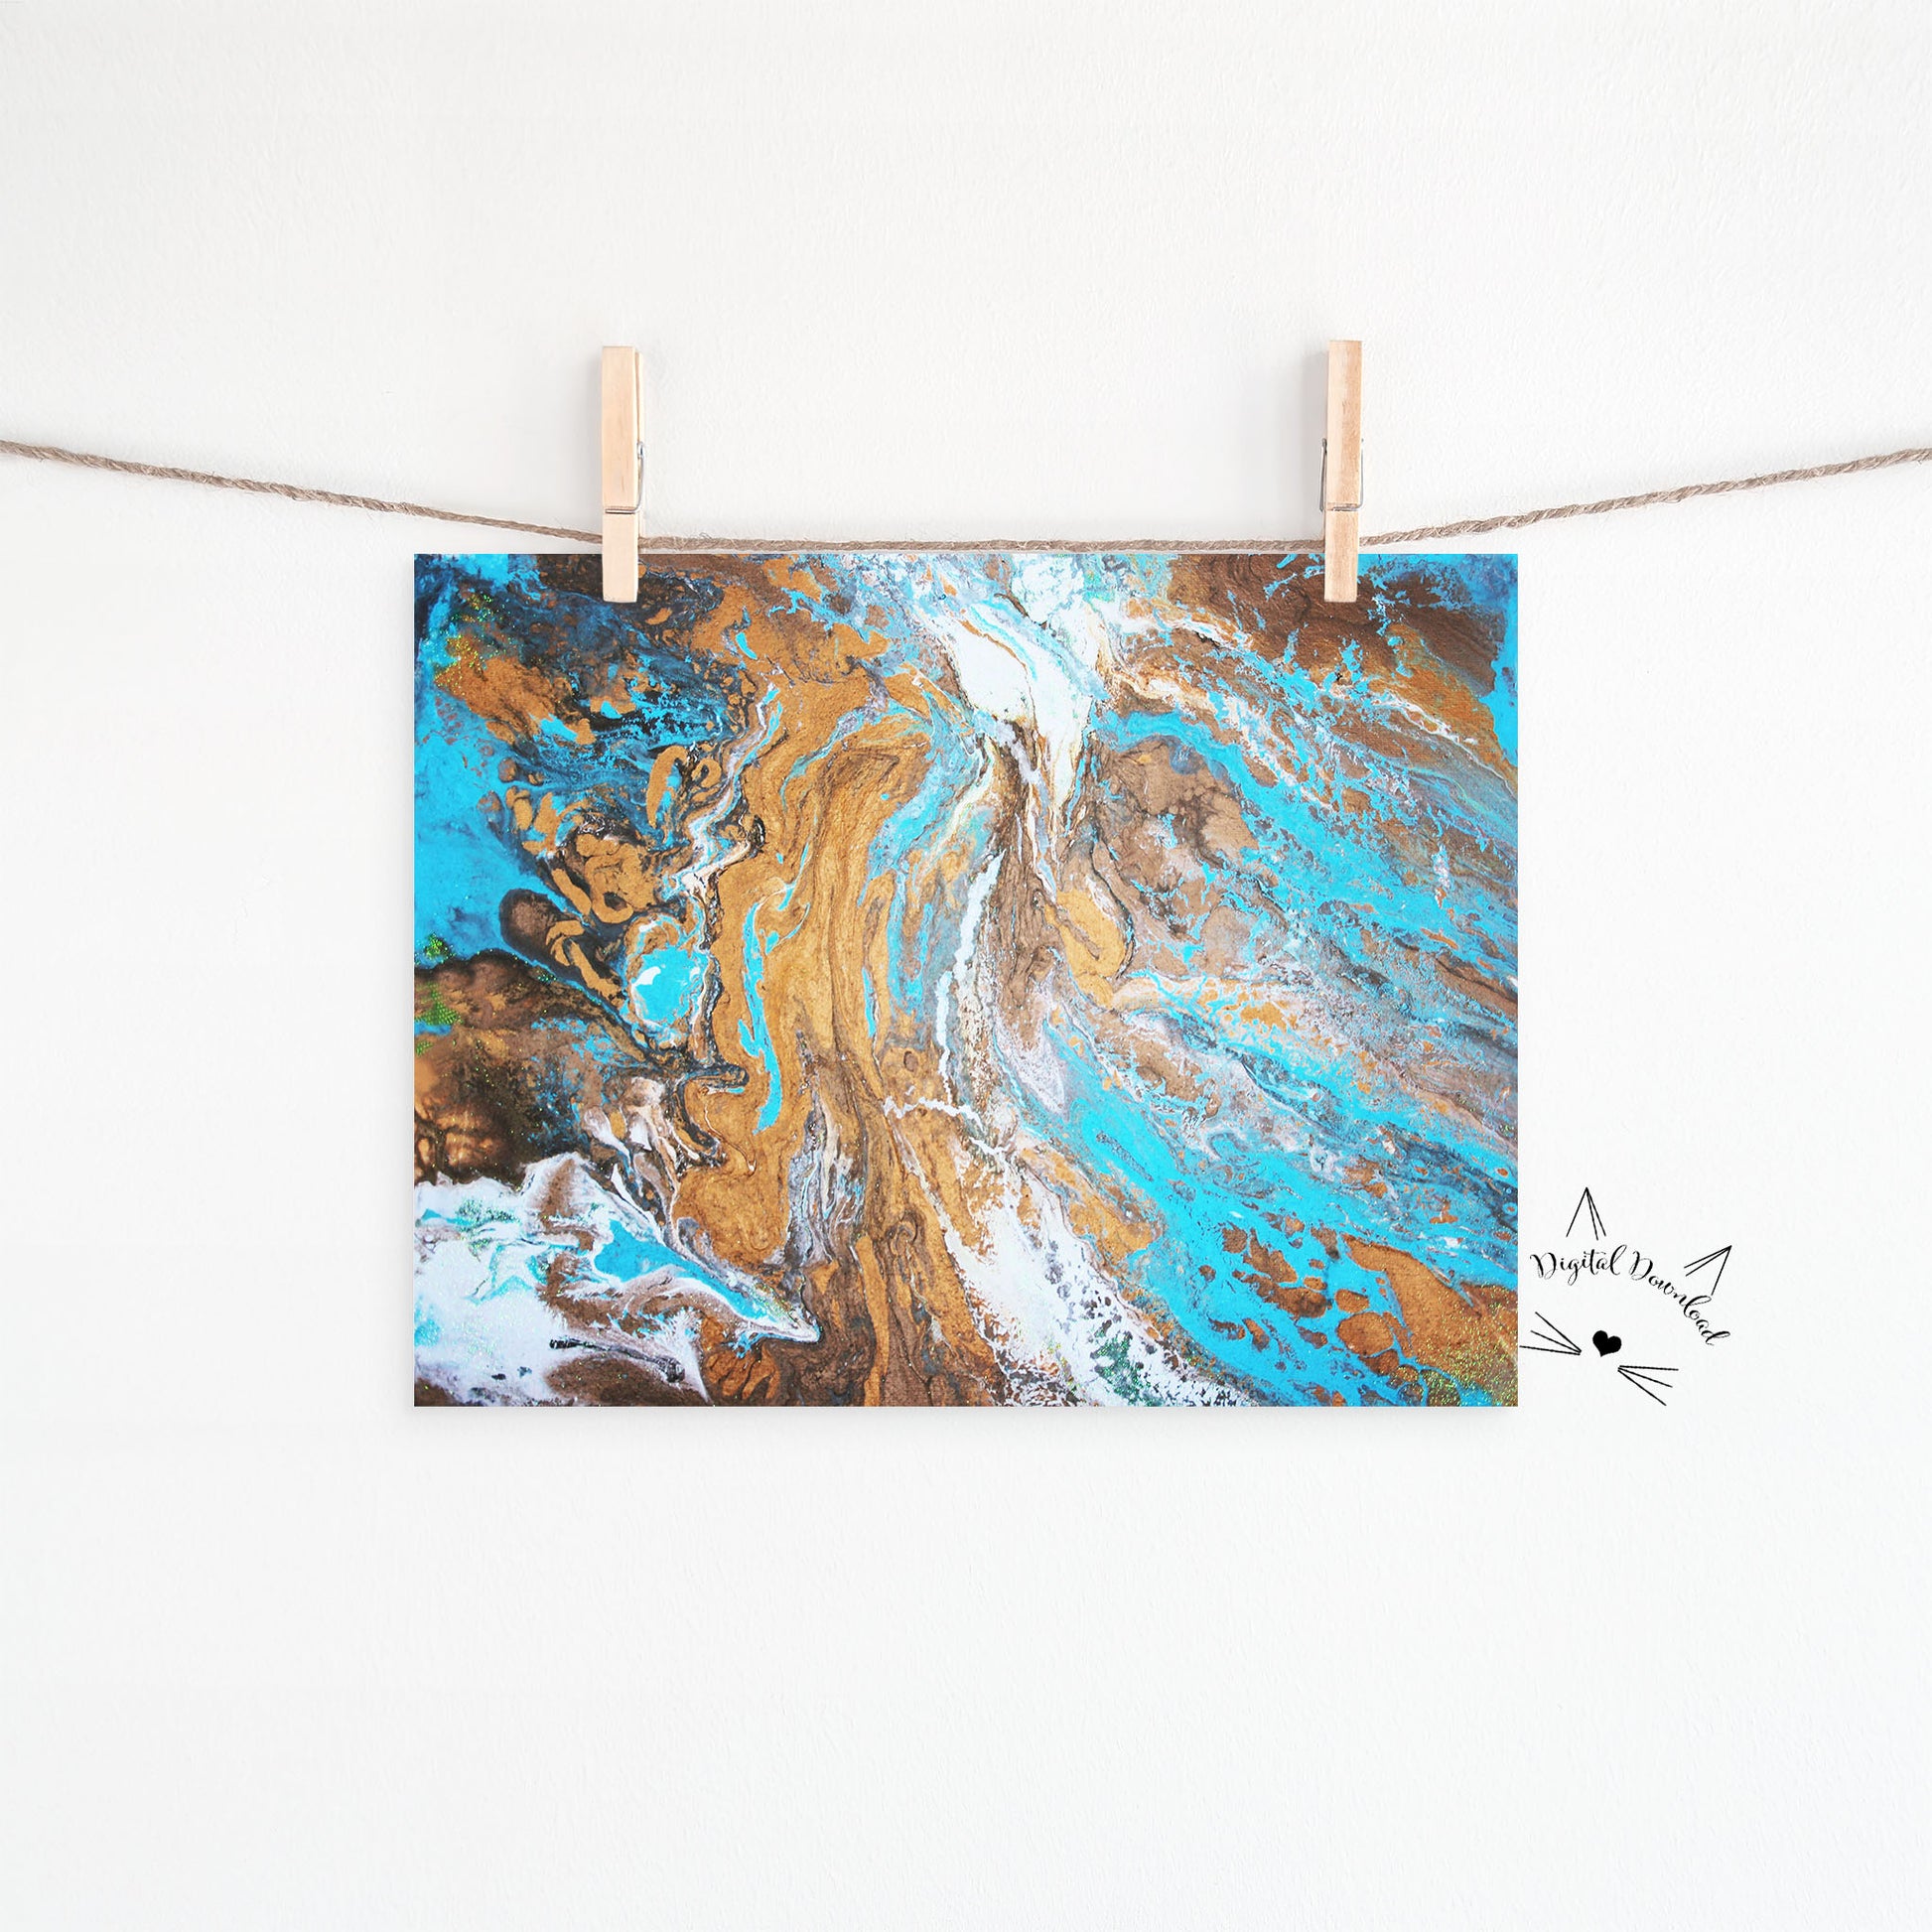 Abstract artwork in copper, turquoise blue, and white for digital download. 